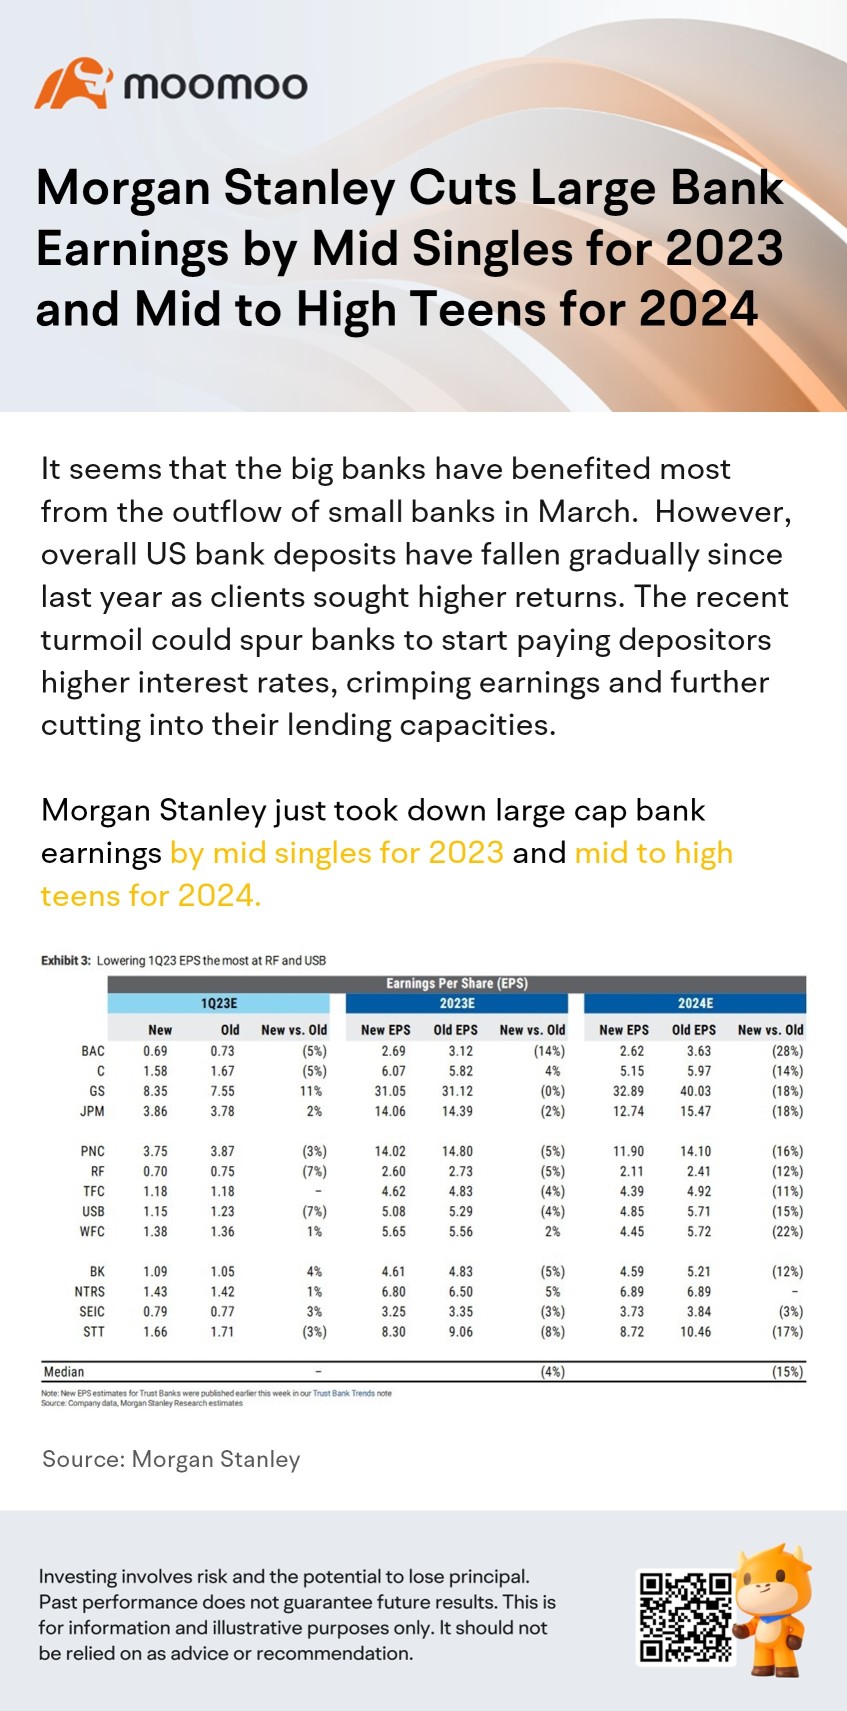 Morgan Stanley Cuts Large Bank Earnings by Mid Singles for 2023 and Mid to High Teens for 2024